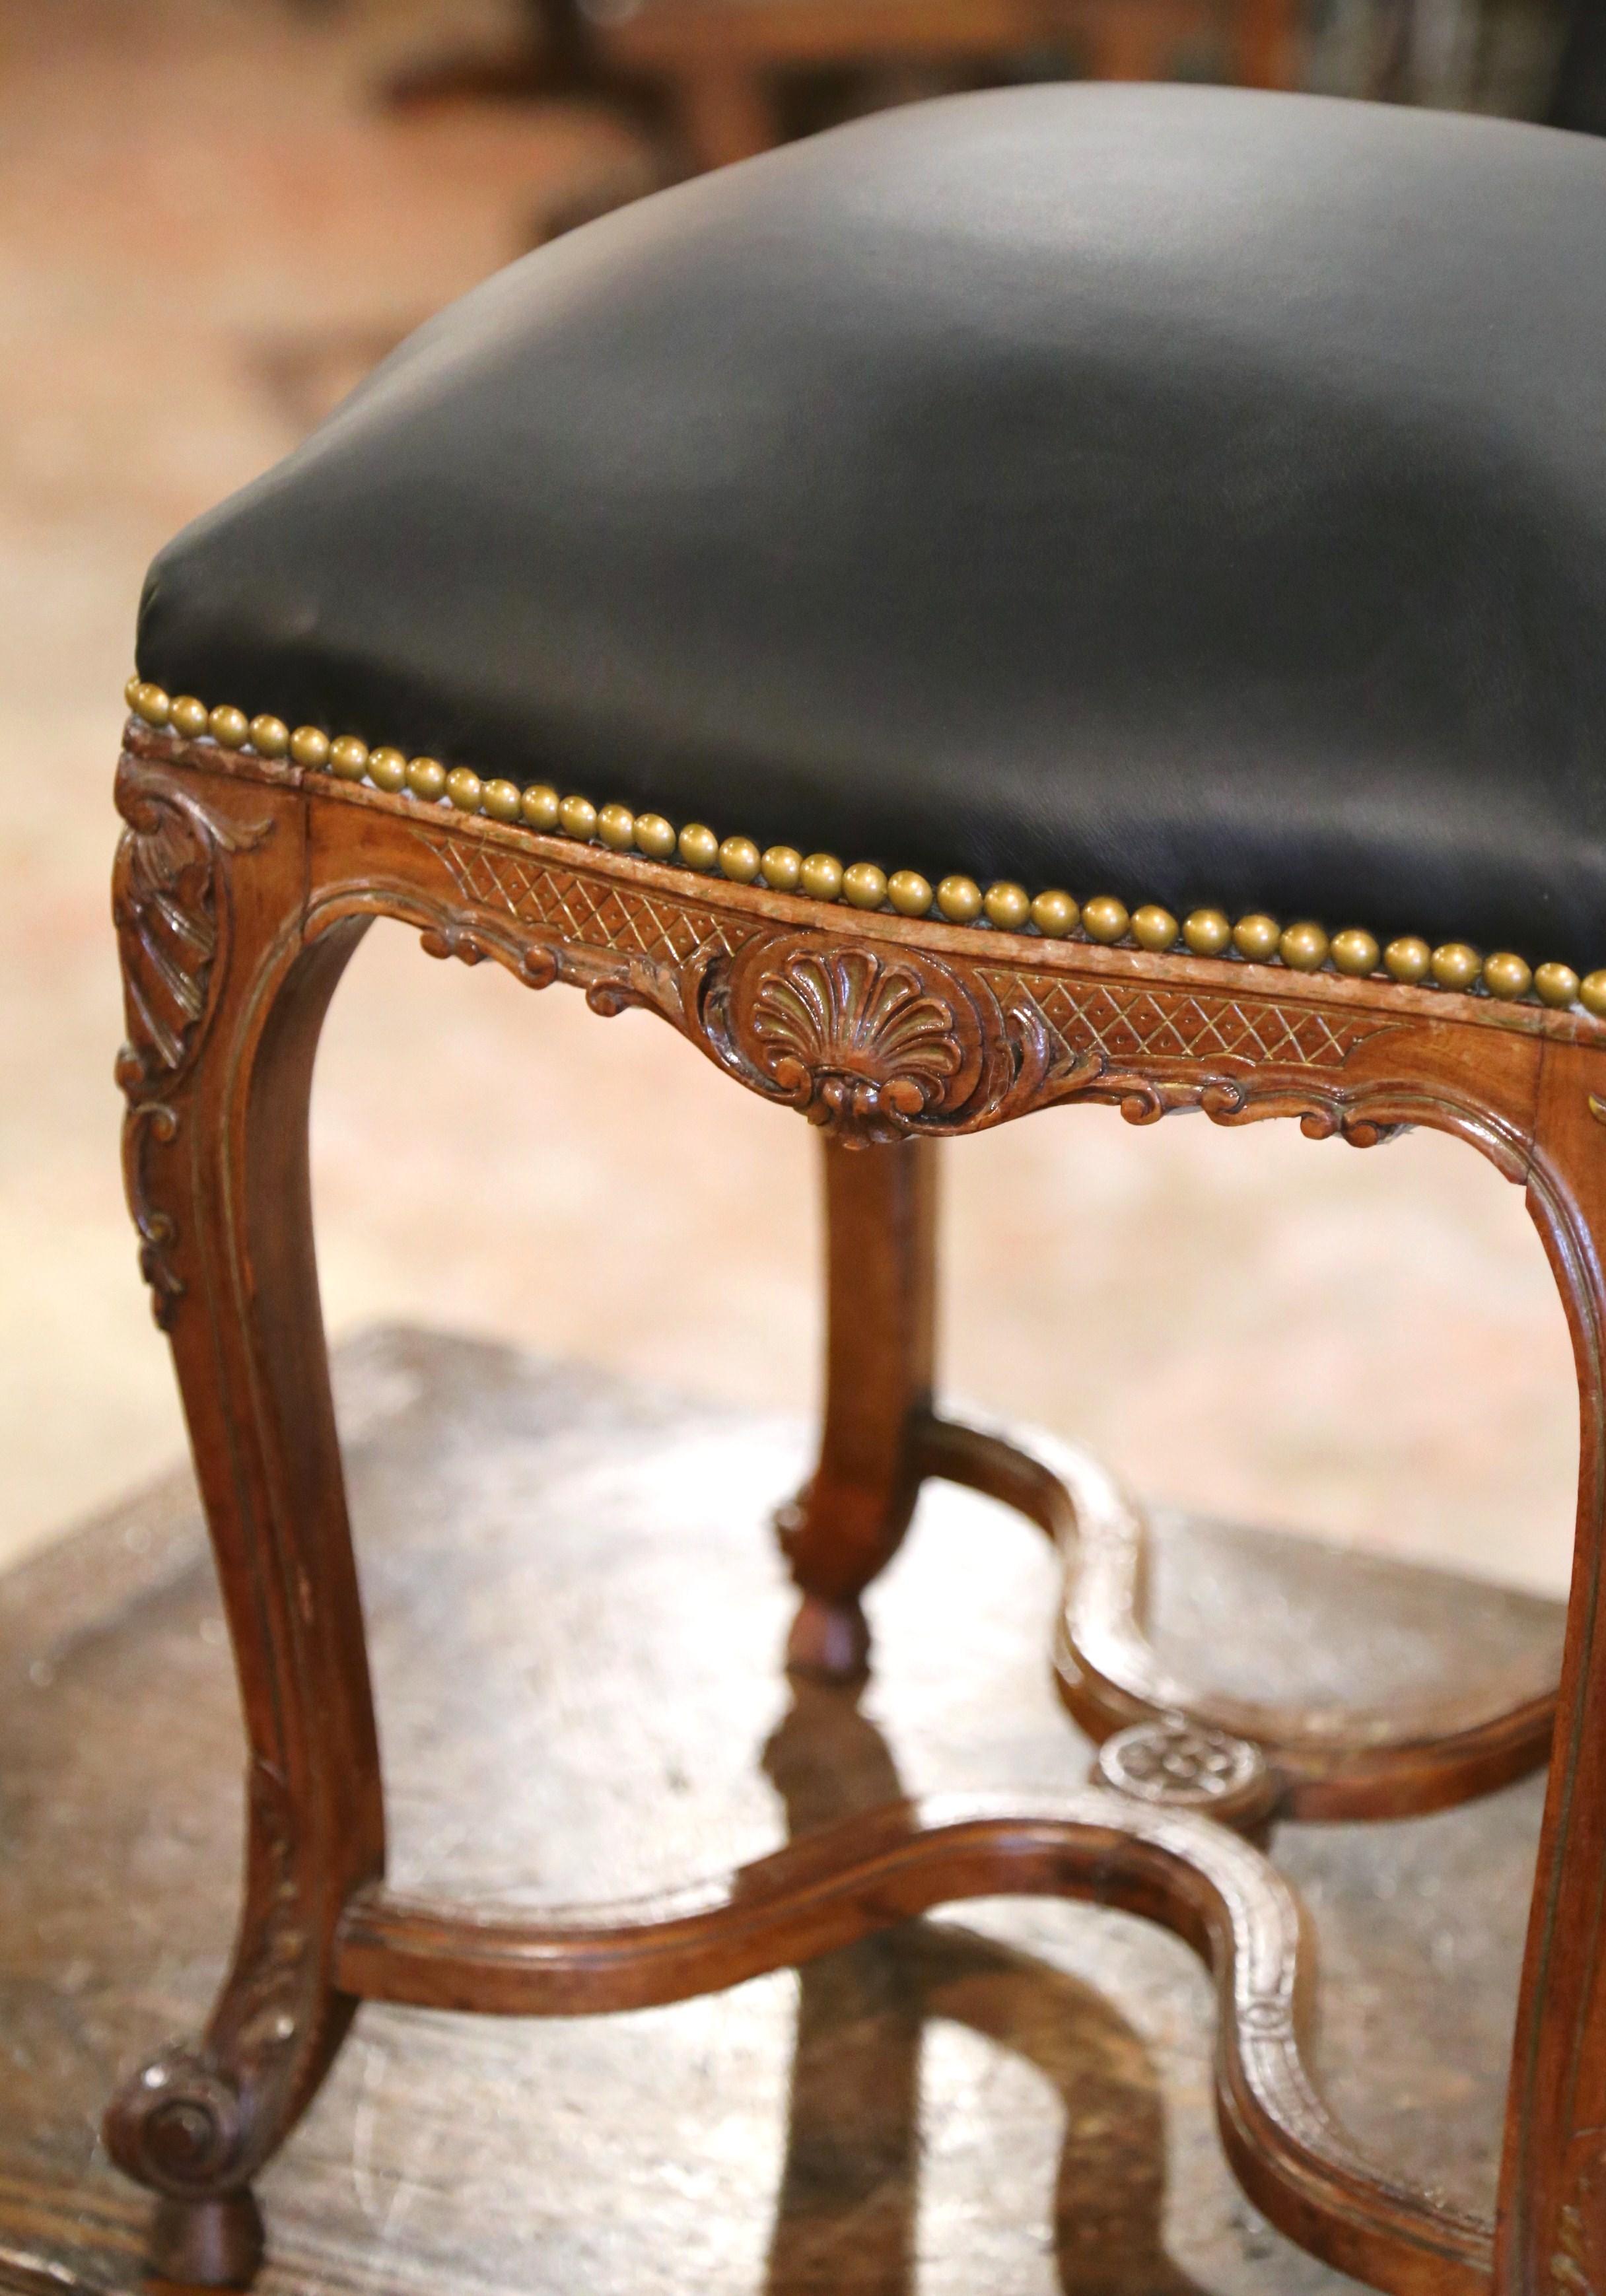 Hand-Carved 19th Century French Louis XV Carved Walnut Stool with Leather from Provence